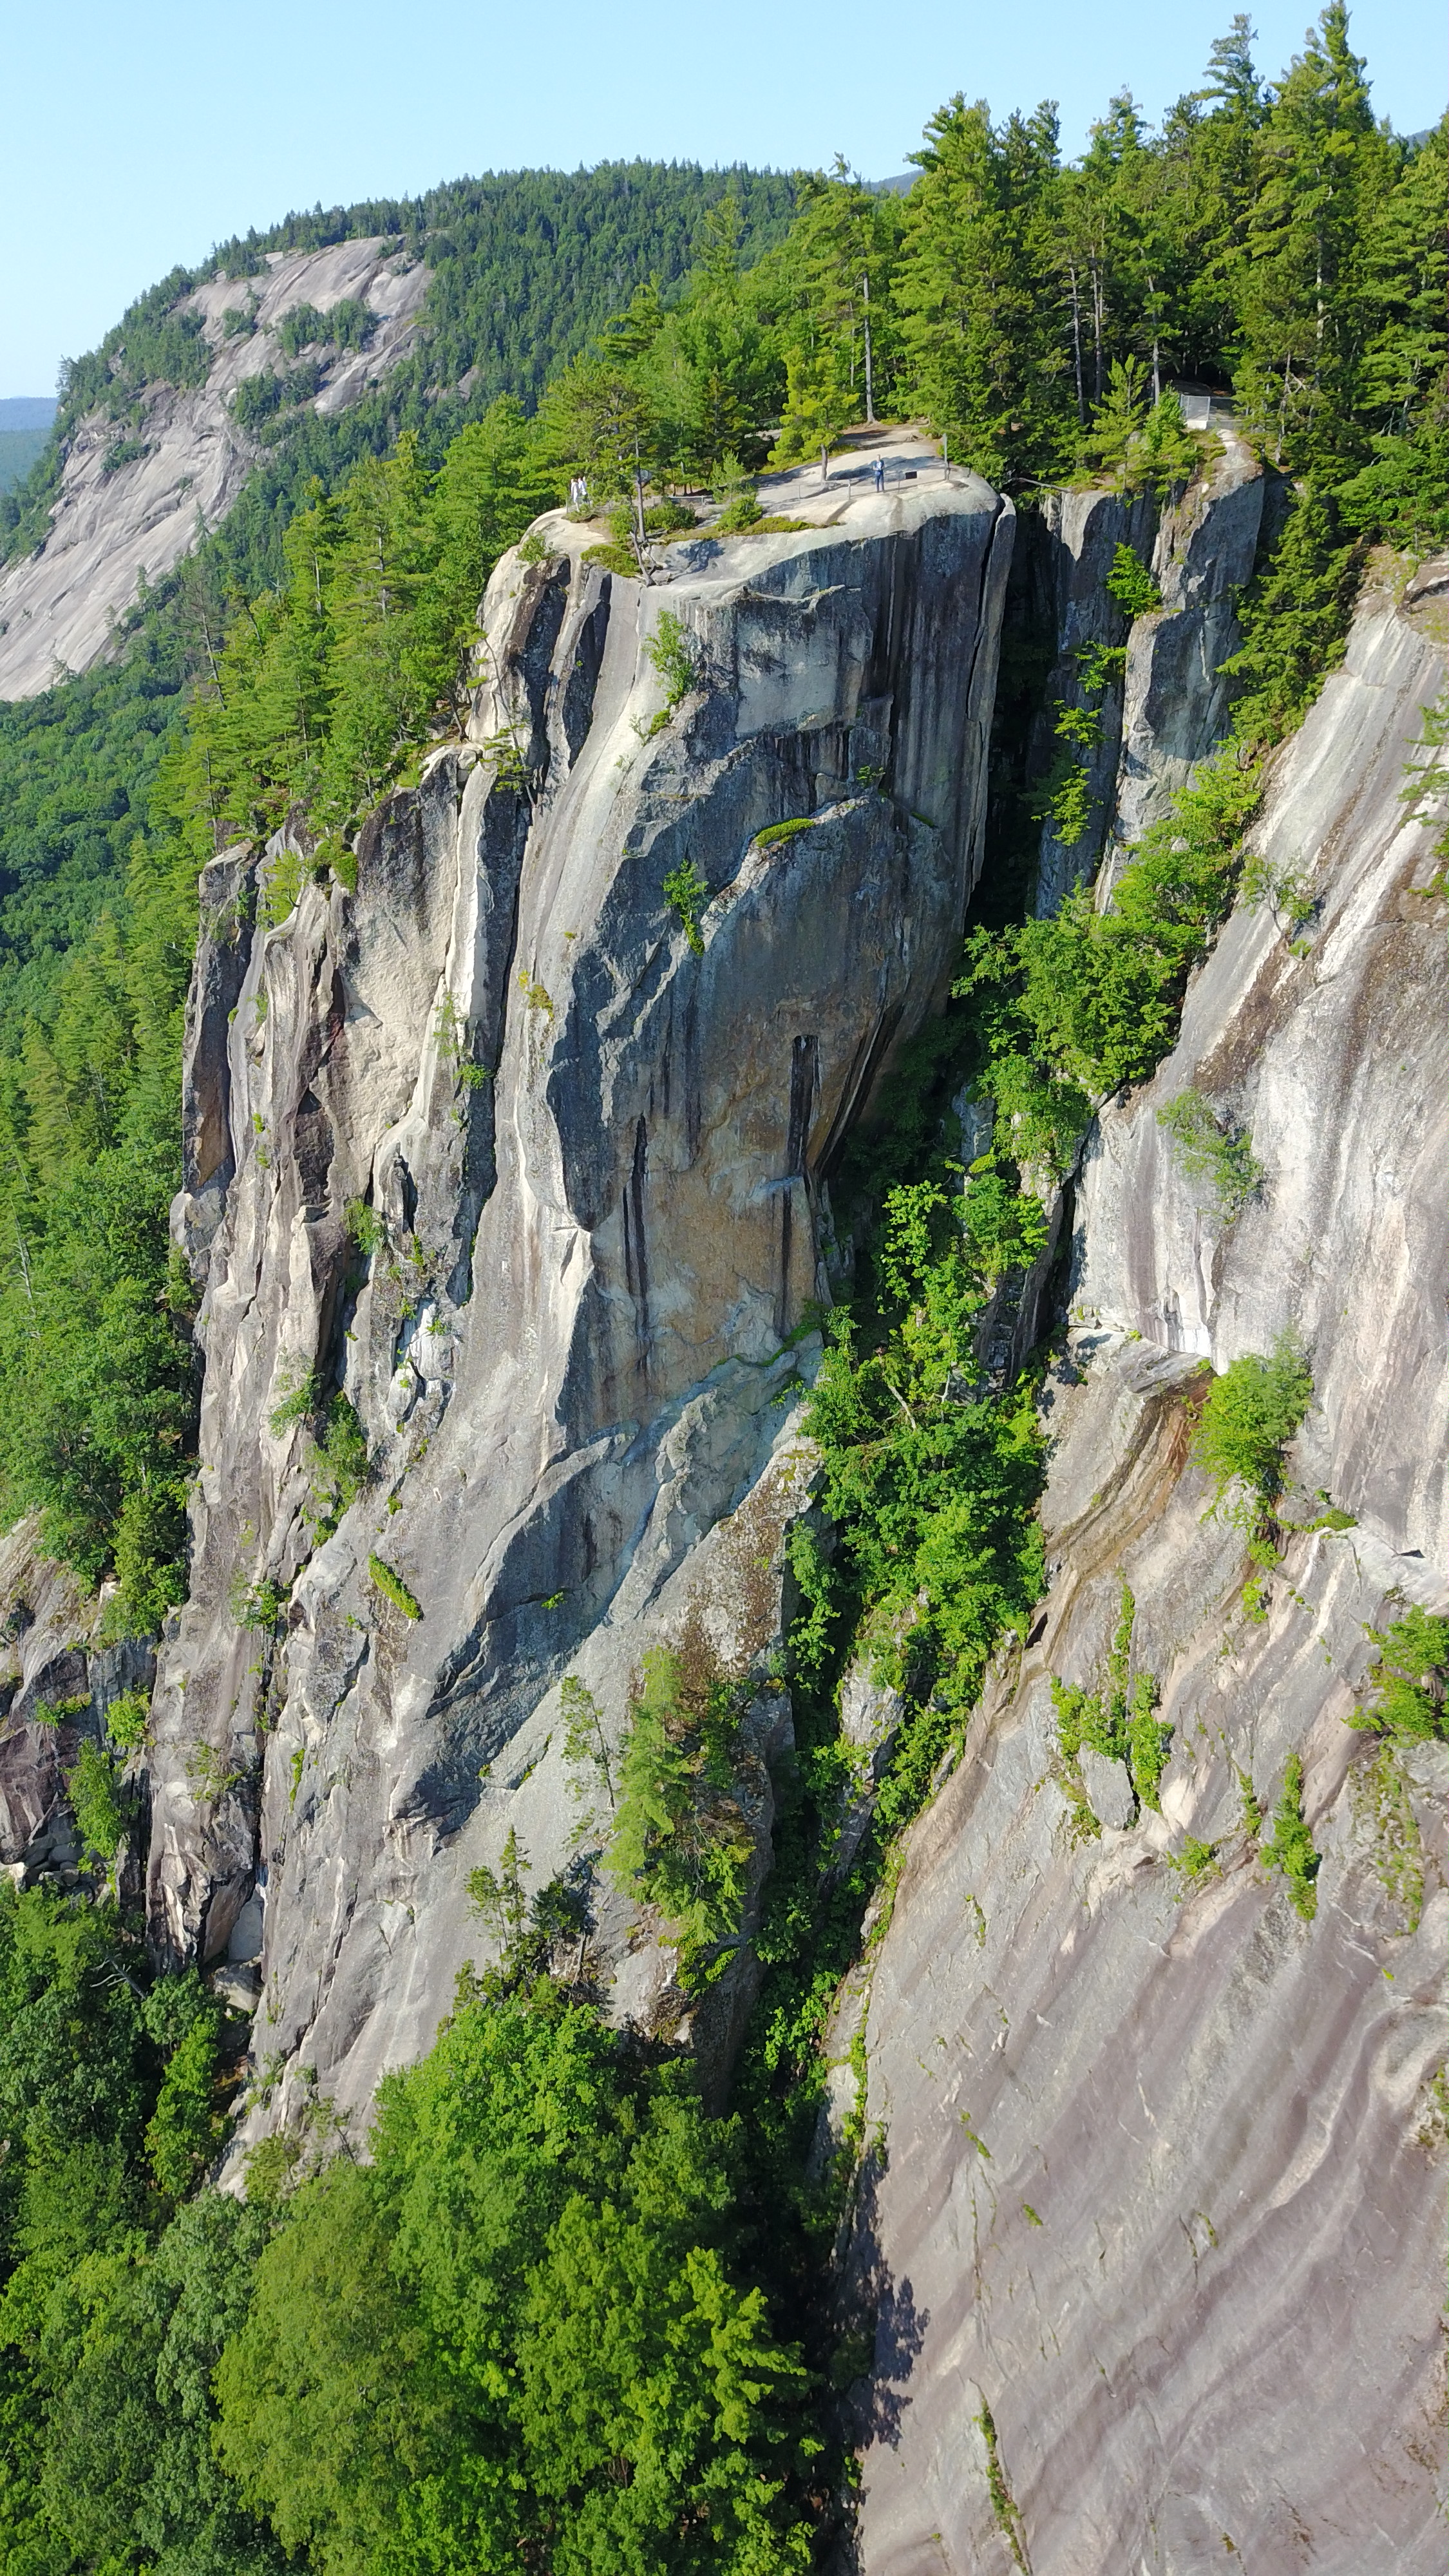 Cathedral Ledge